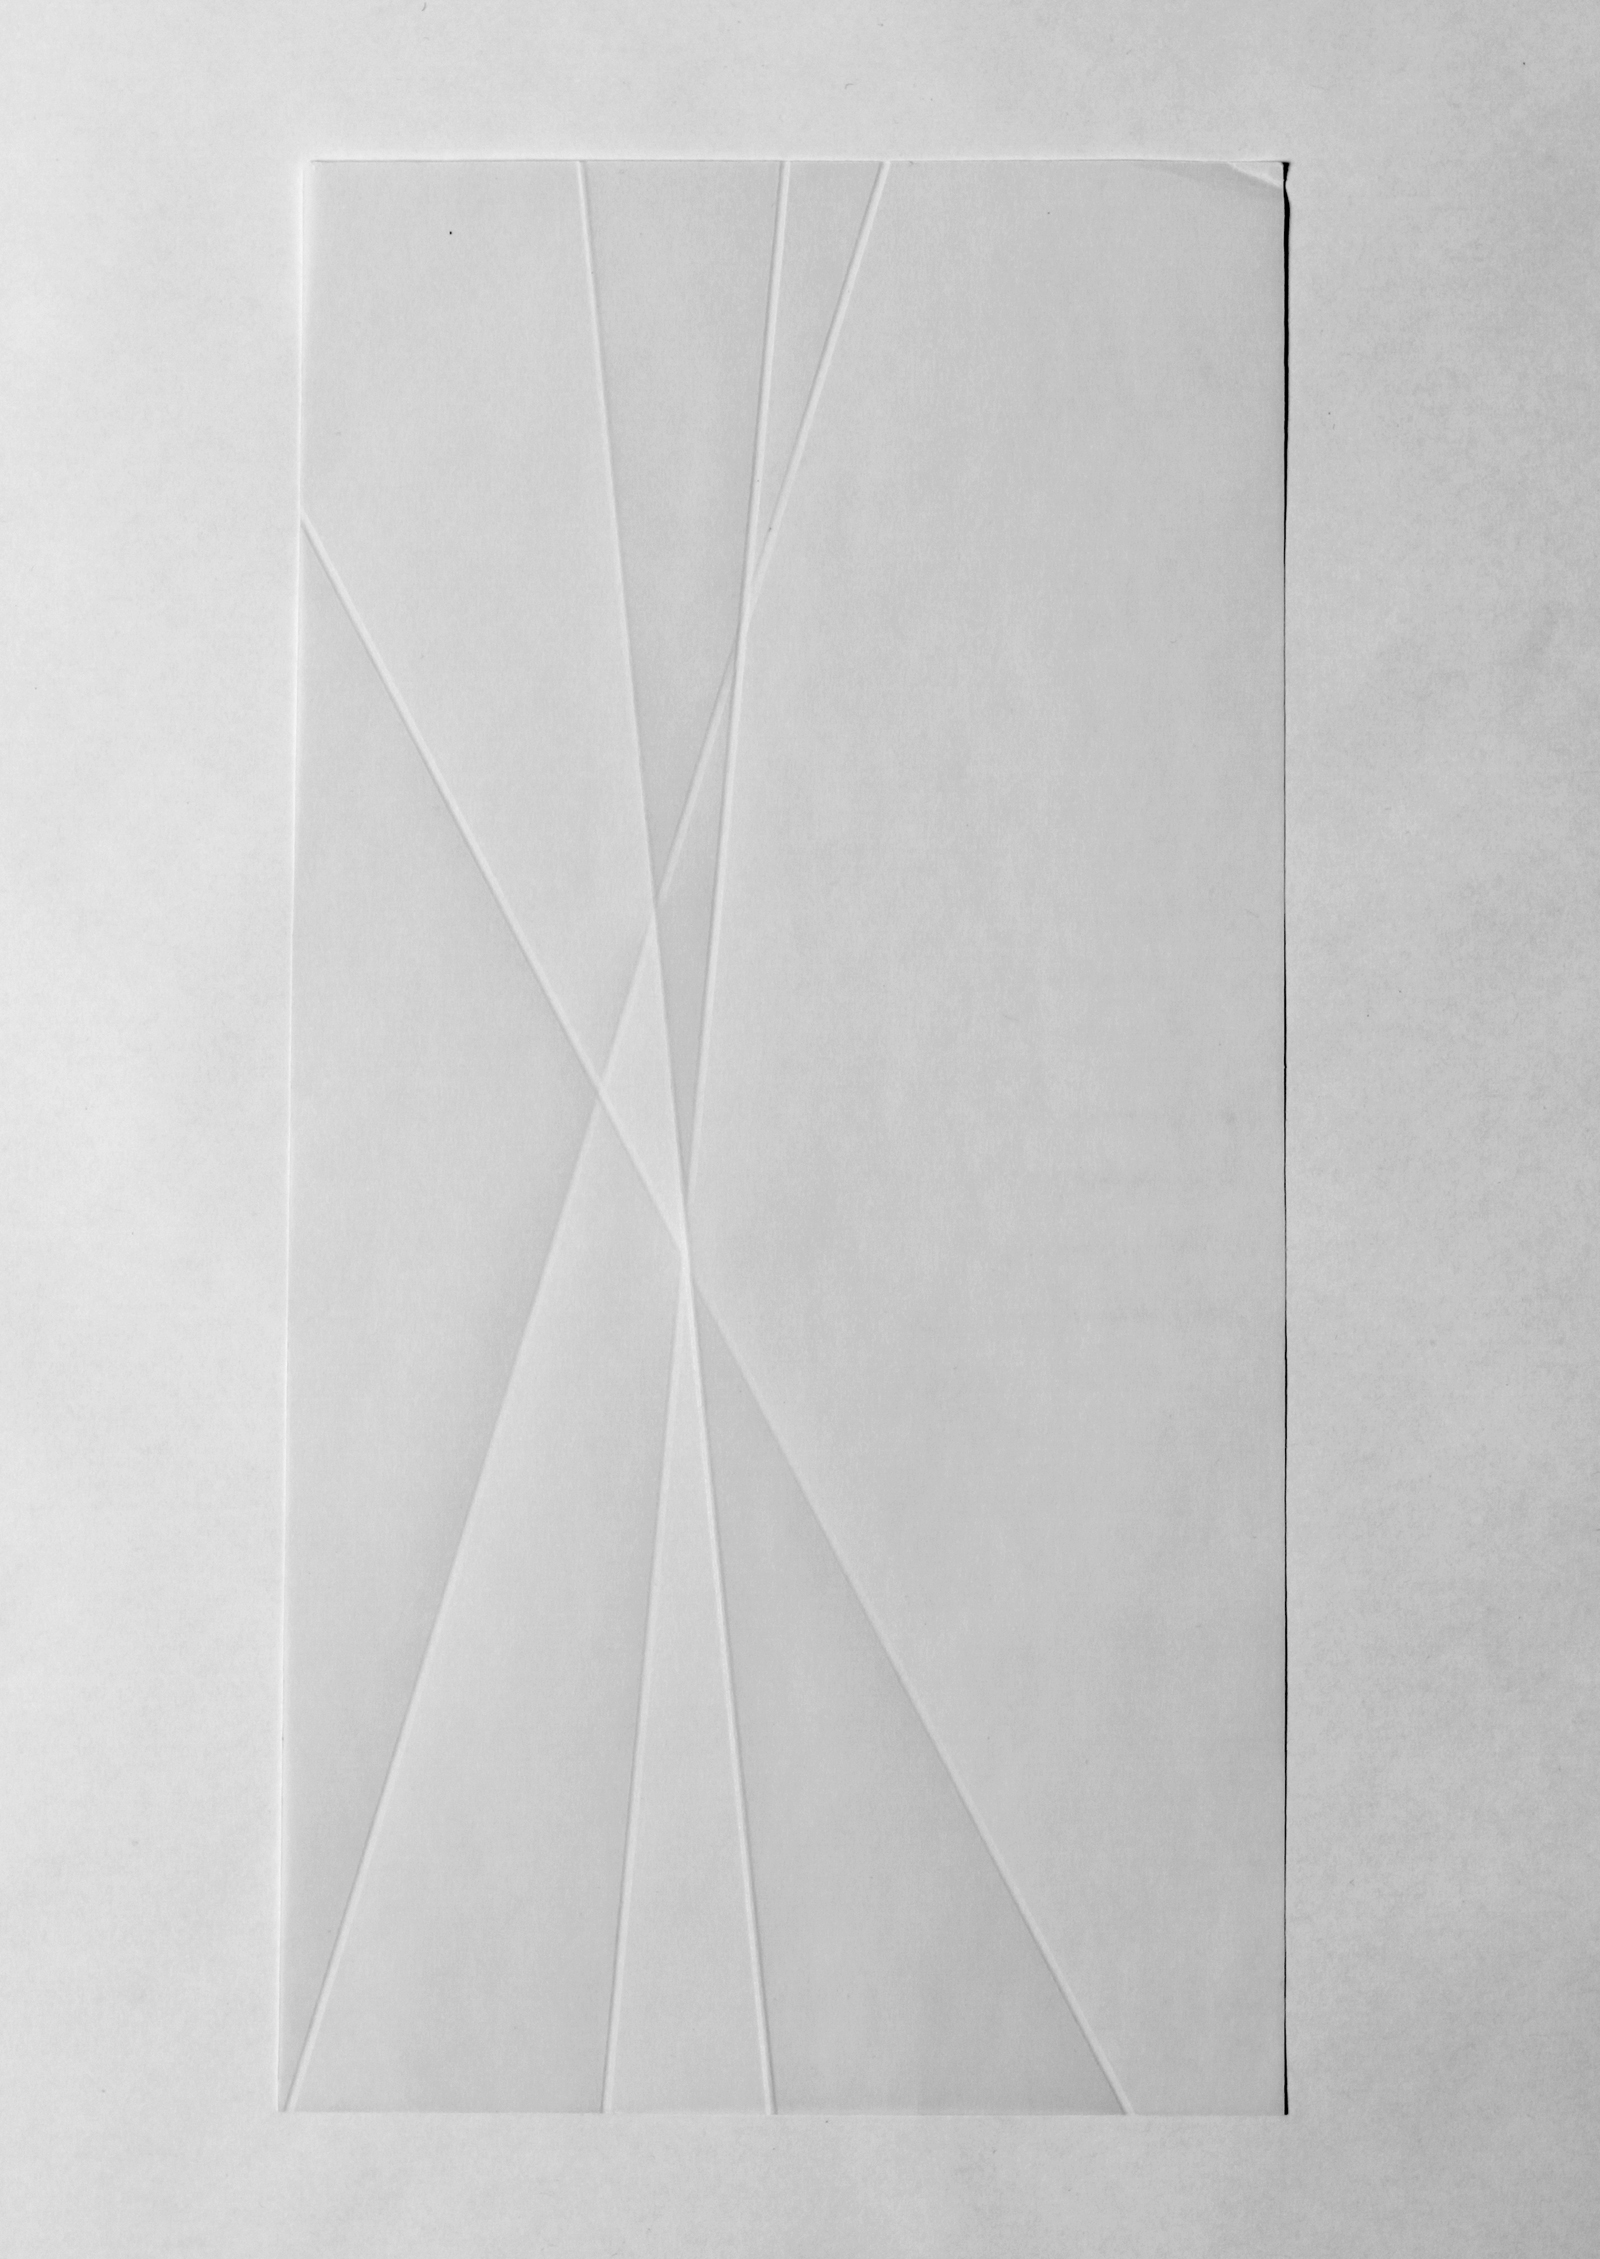   from the ongoing series: O/, Divided/Defined, Weights, Measures, and Emotional Geometry  2013, Folded Mylar. 8 x 10 inches folded 